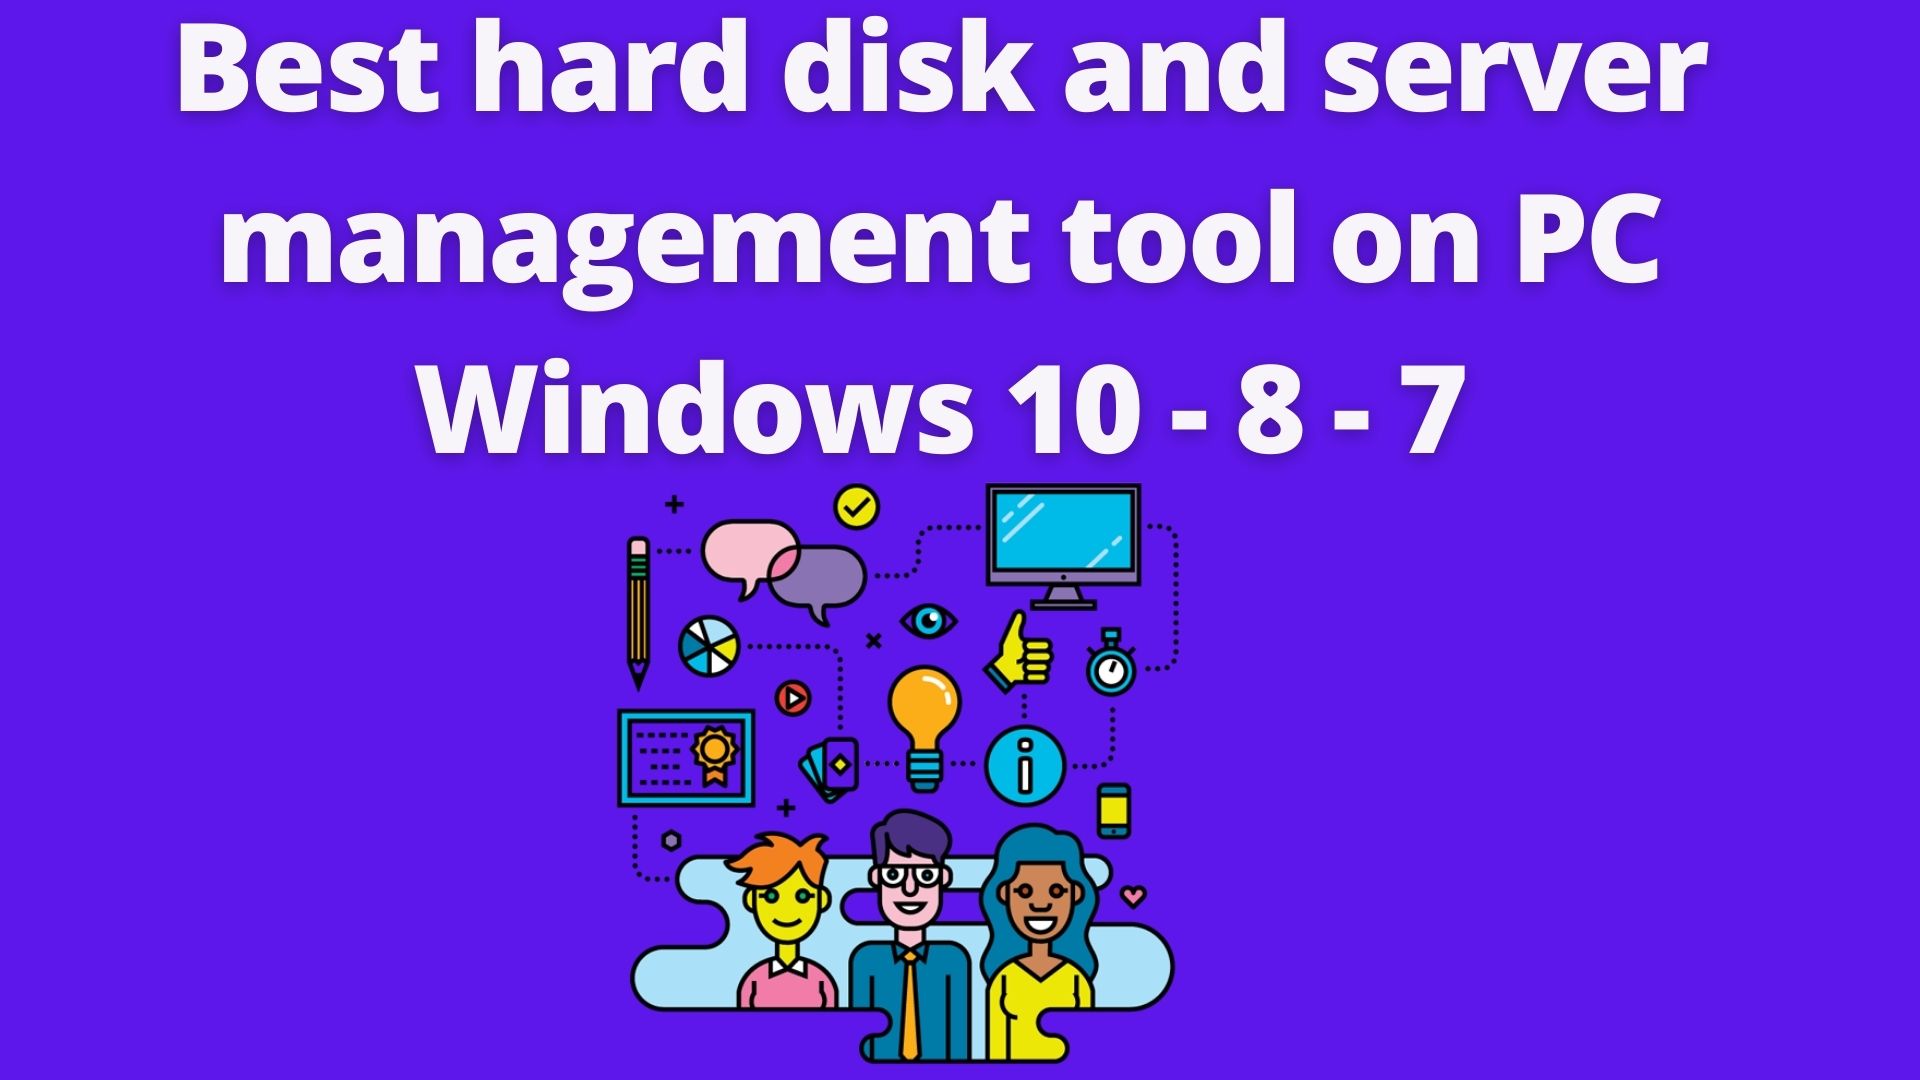 Best hard disk and server management tool on pc windows 10 - 8 - 7